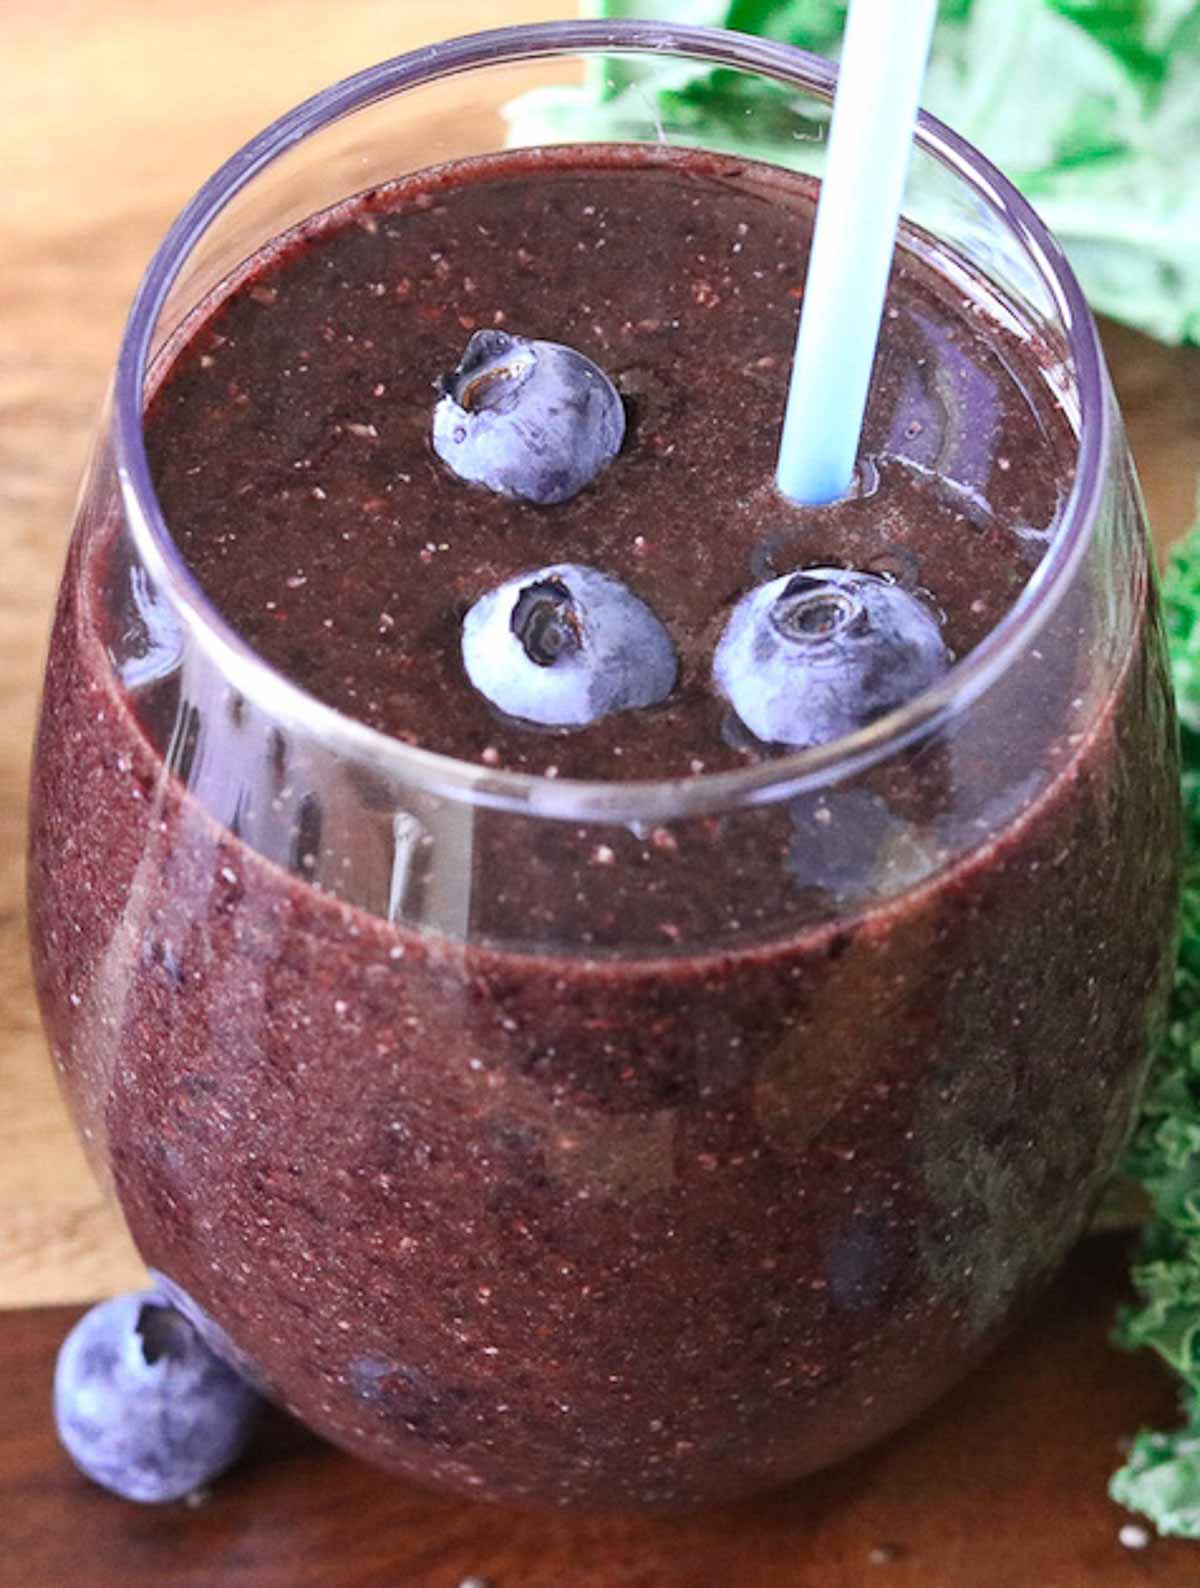 Close-up of a glass of blueberry kale smoothie.